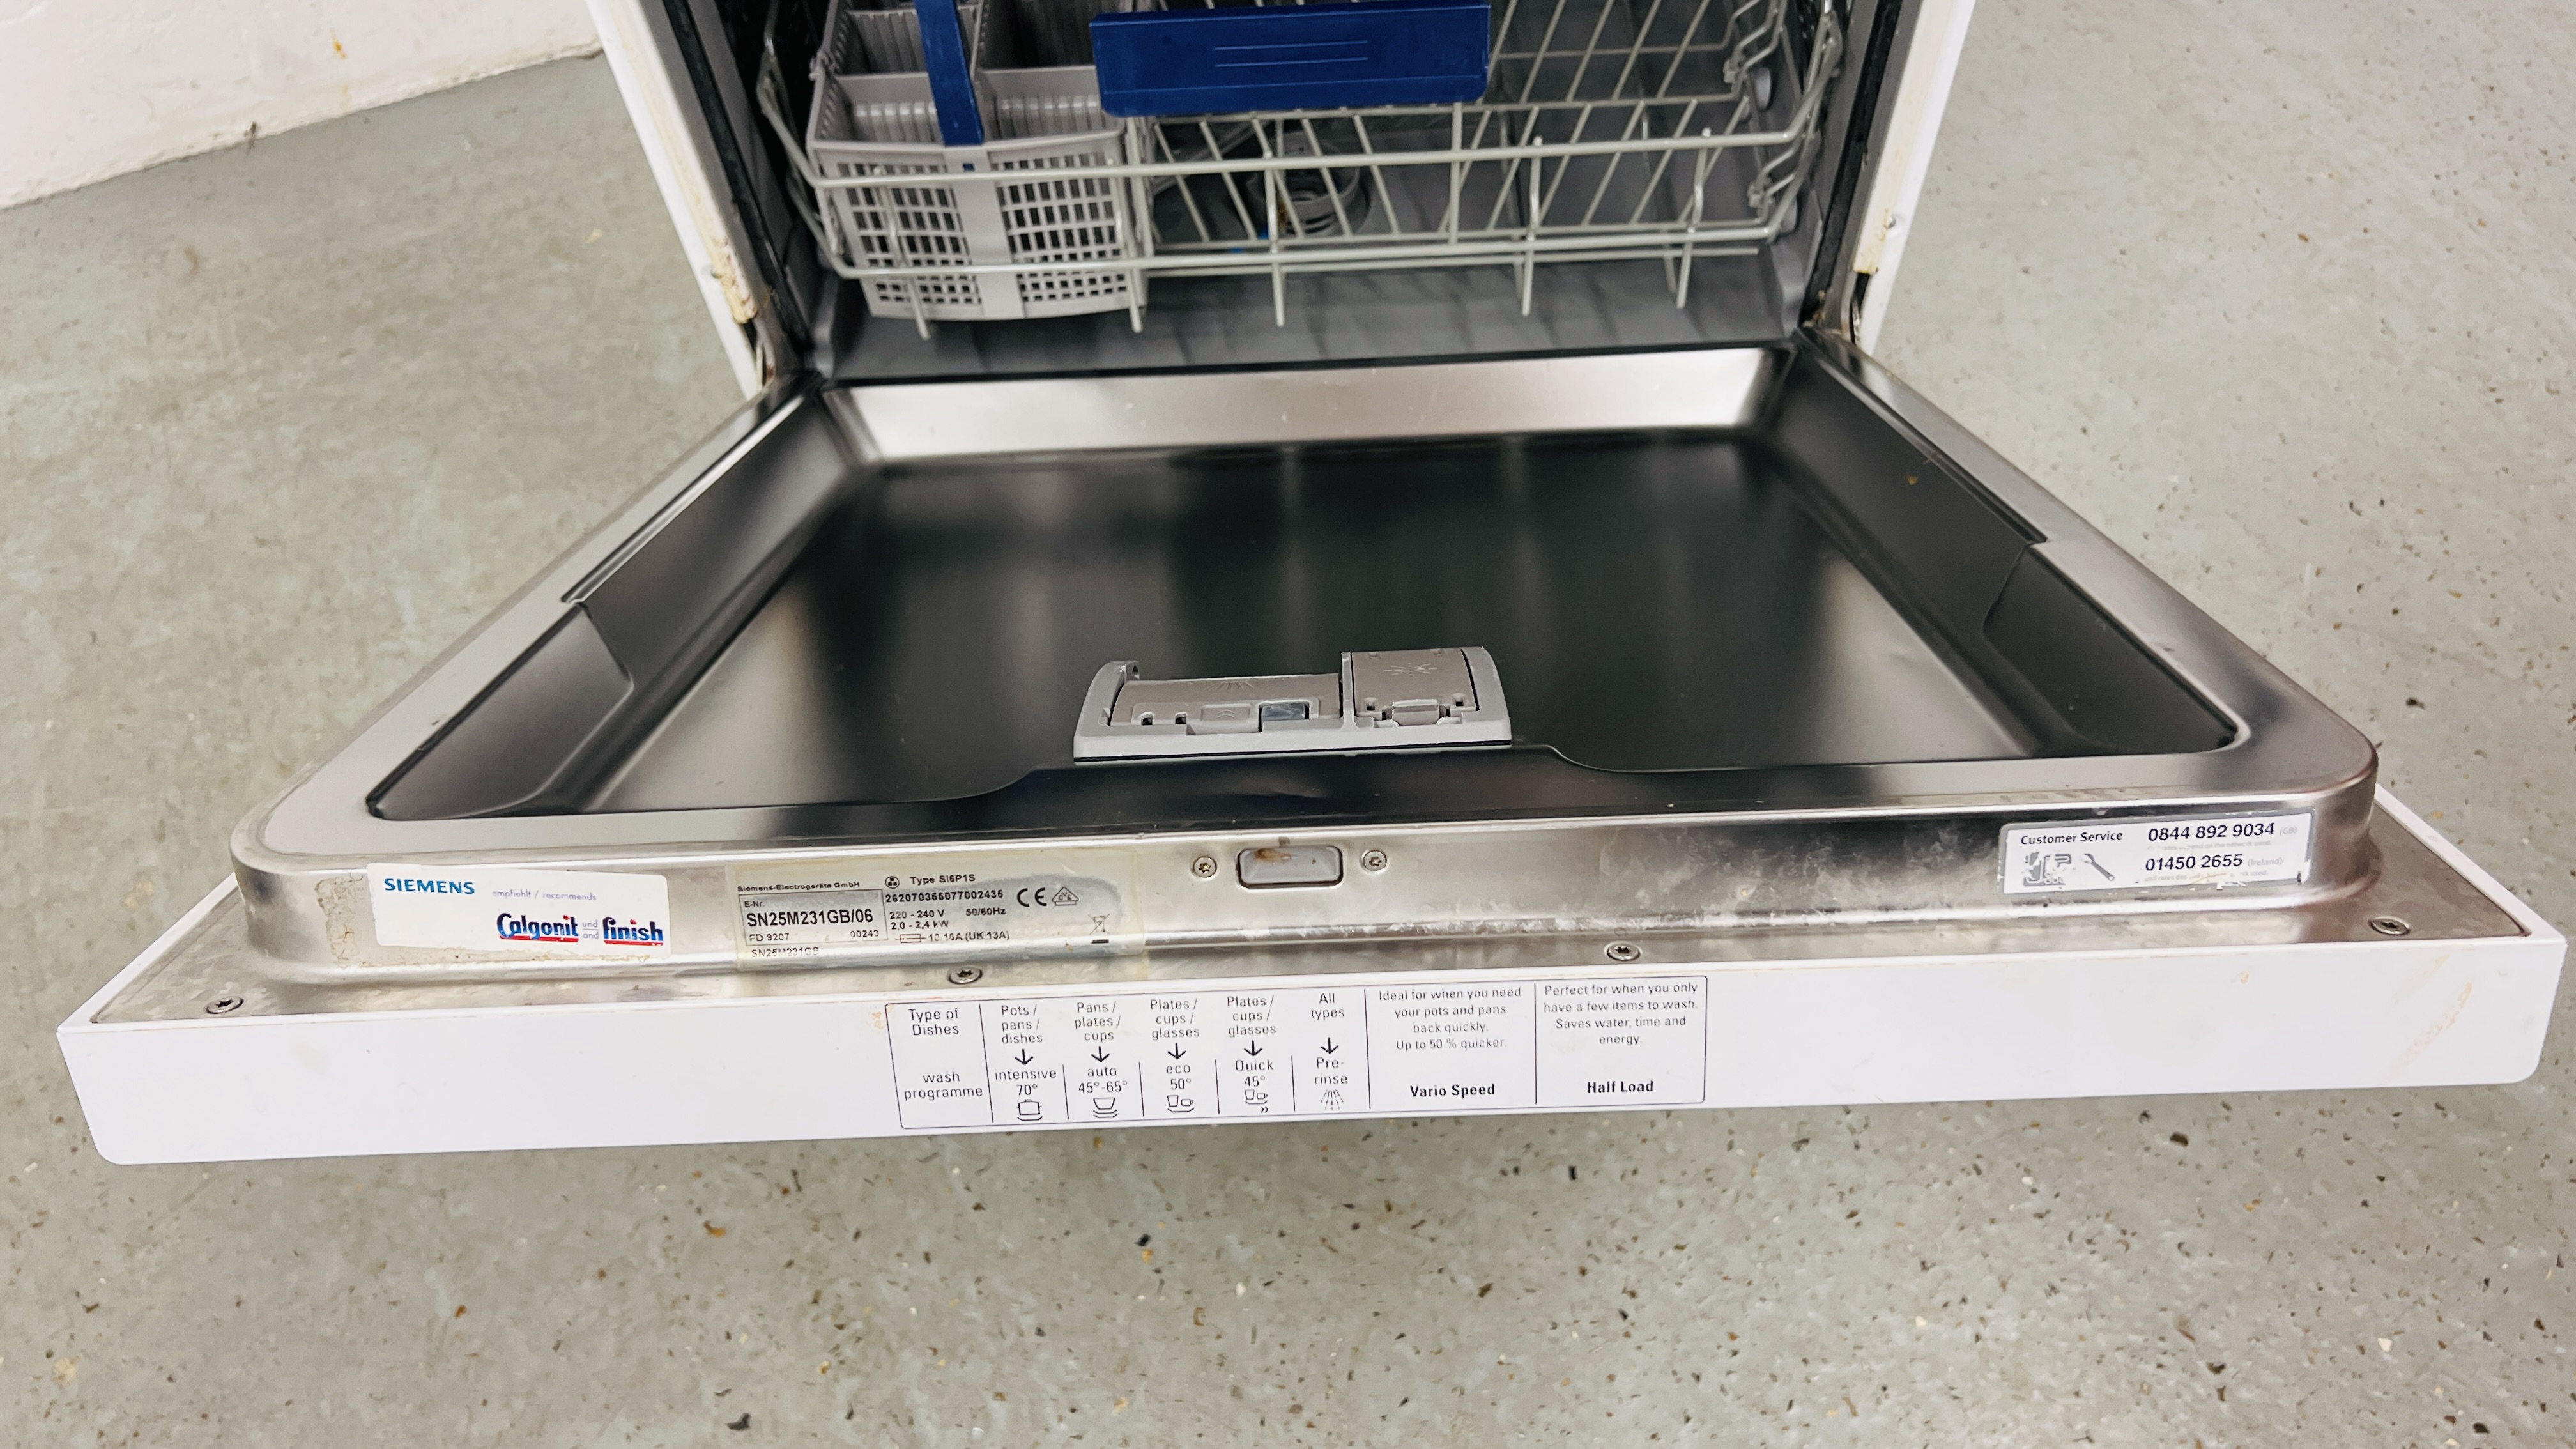 SIEMENS iQ100 DISHWASHER - SOLD AS SEEN - Image 8 of 8